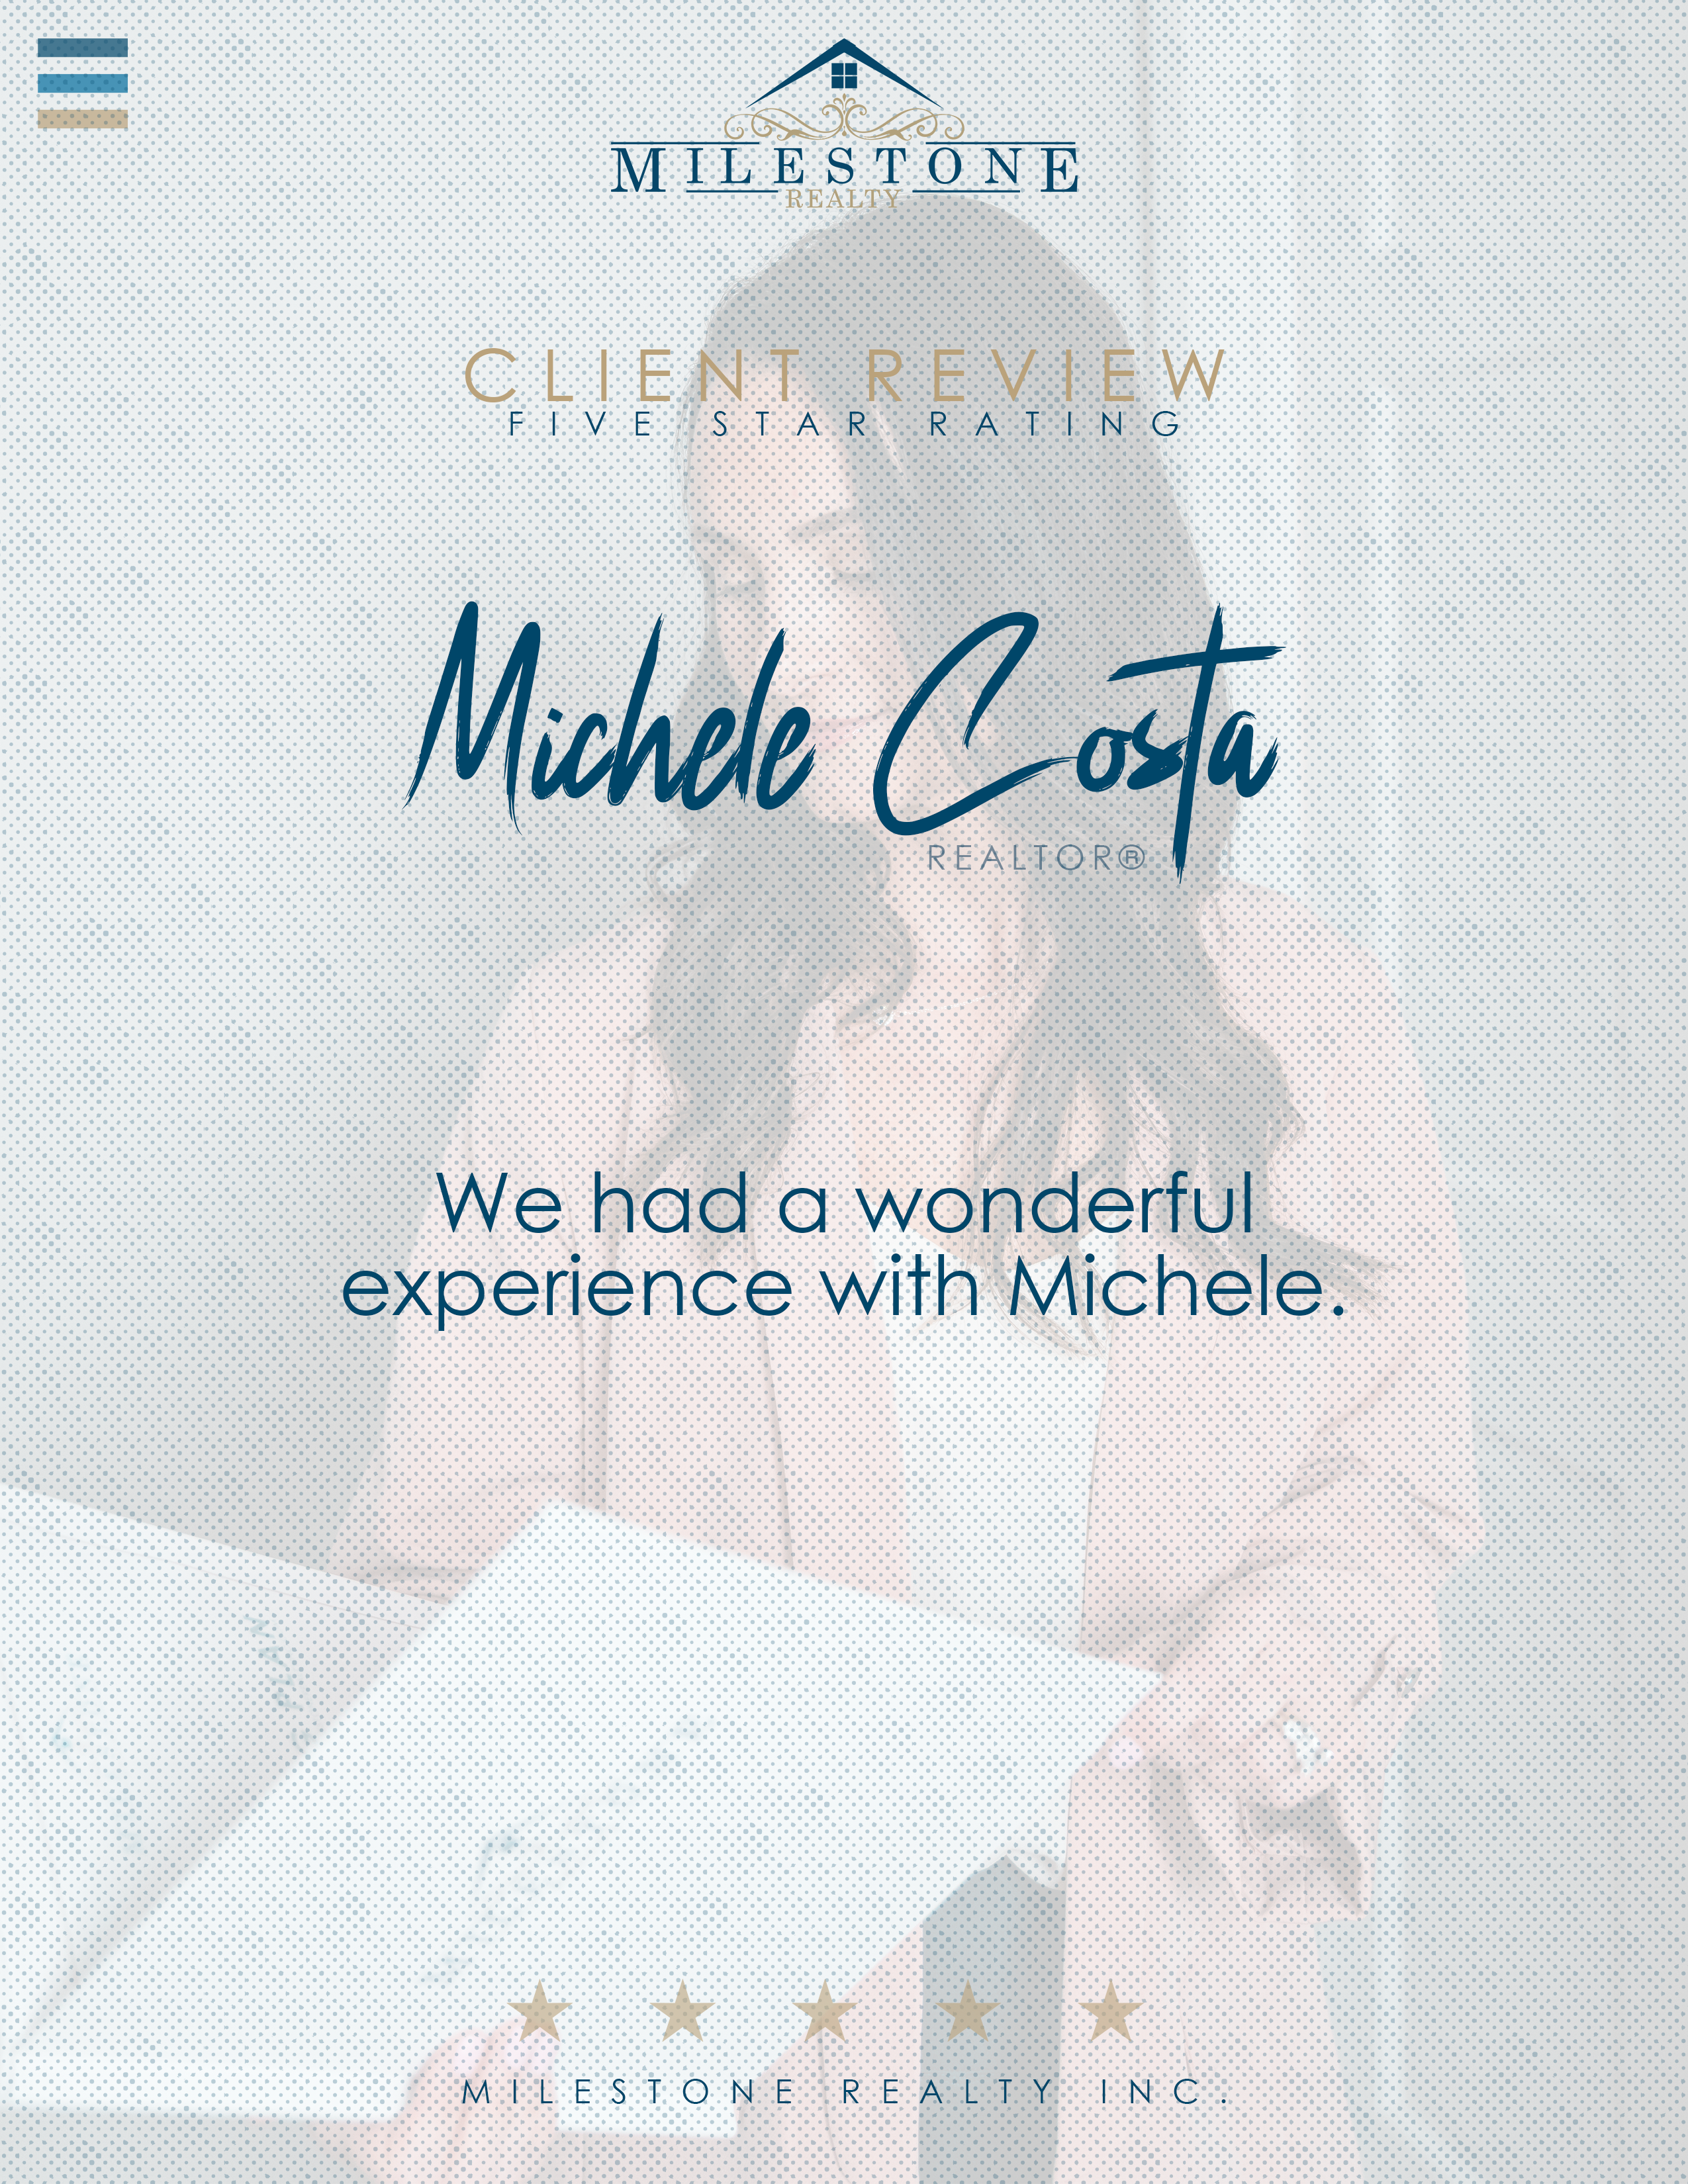 Michele Costa Review